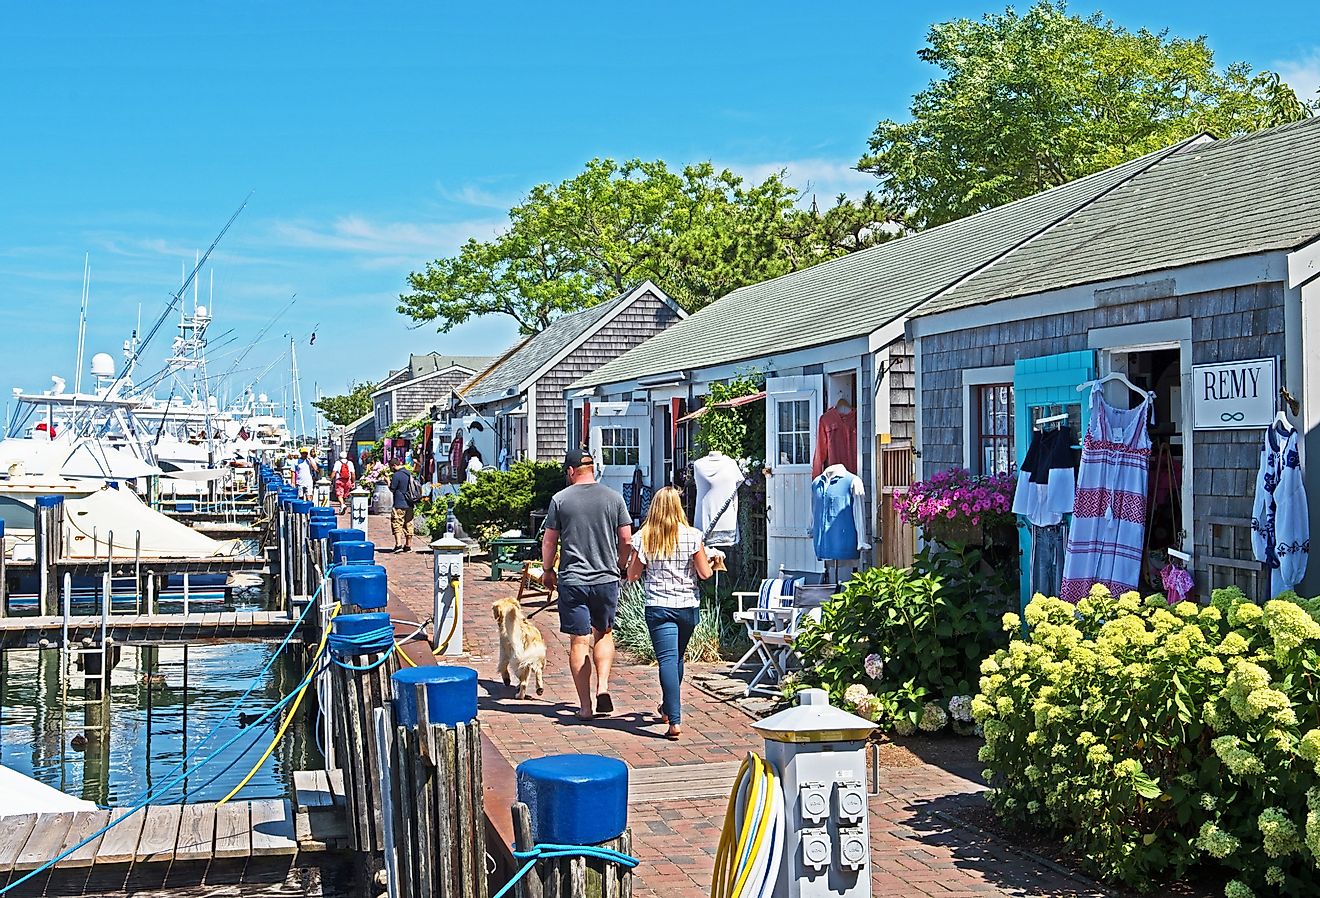 A row of eclectic stores next to the harbor in Nantucket, Massachusetts. Image credit Mystic Stock Photography via Shutterstock